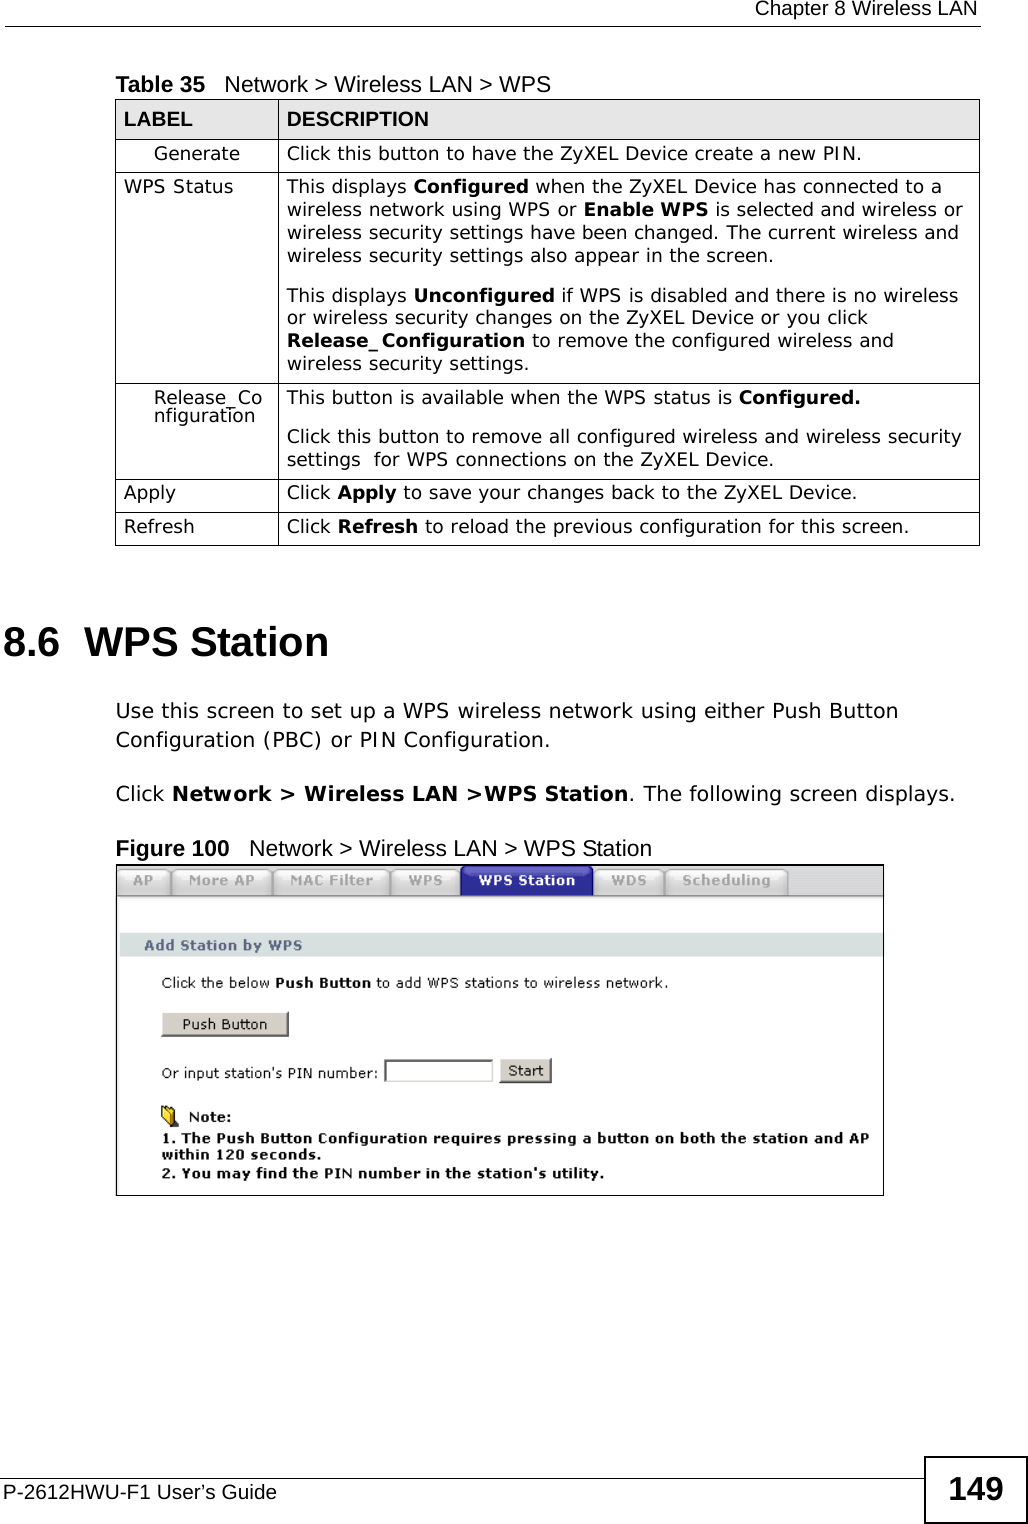  Chapter 8 Wireless LANP-2612HWU-F1 User’s Guide 1498.6  WPS StationUse this screen to set up a WPS wireless network using either Push Button Configuration (PBC) or PIN Configuration.Click Network &gt; Wireless LAN &gt;WPS Station. The following screen displays.Figure 100   Network &gt; Wireless LAN &gt; WPS StationGenerate Click this button to have the ZyXEL Device create a new PIN. WPS Status This displays Configured when the ZyXEL Device has connected to a wireless network using WPS or Enable WPS is selected and wireless or wireless security settings have been changed. The current wireless and wireless security settings also appear in the screen.This displays Unconfigured if WPS is disabled and there is no wireless or wireless security changes on the ZyXEL Device or you click Release_Configuration to remove the configured wireless and wireless security settings.Release_Configuration This button is available when the WPS status is Configured.Click this button to remove all configured wireless and wireless security settings  for WPS connections on the ZyXEL Device.Apply Click Apply to save your changes back to the ZyXEL Device.Refresh Click Refresh to reload the previous configuration for this screen.Table 35   Network &gt; Wireless LAN &gt; WPSLABEL DESCRIPTION